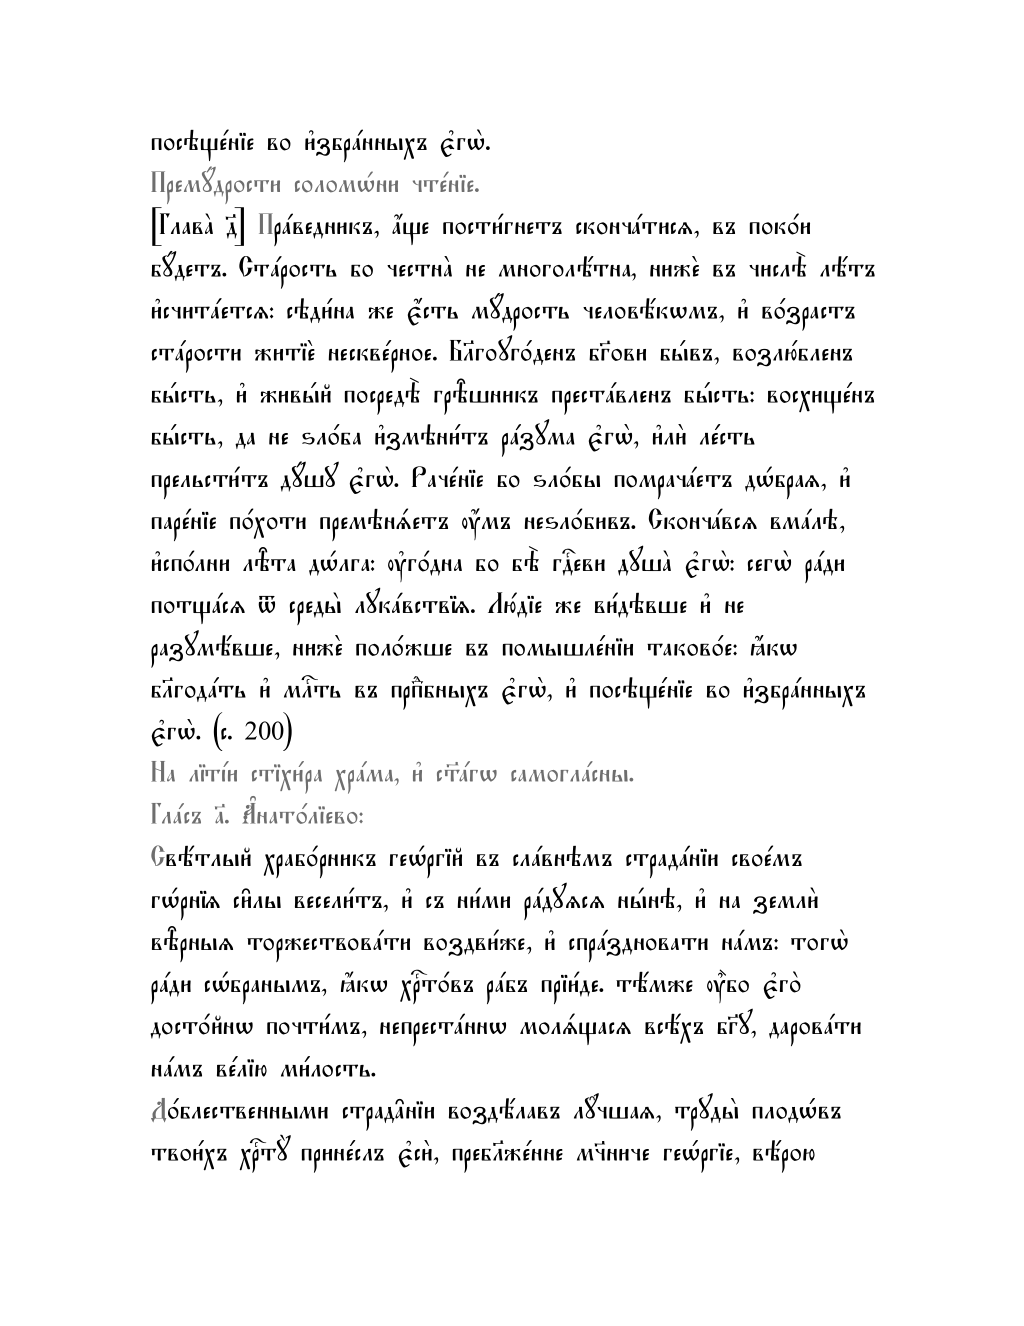 page 6